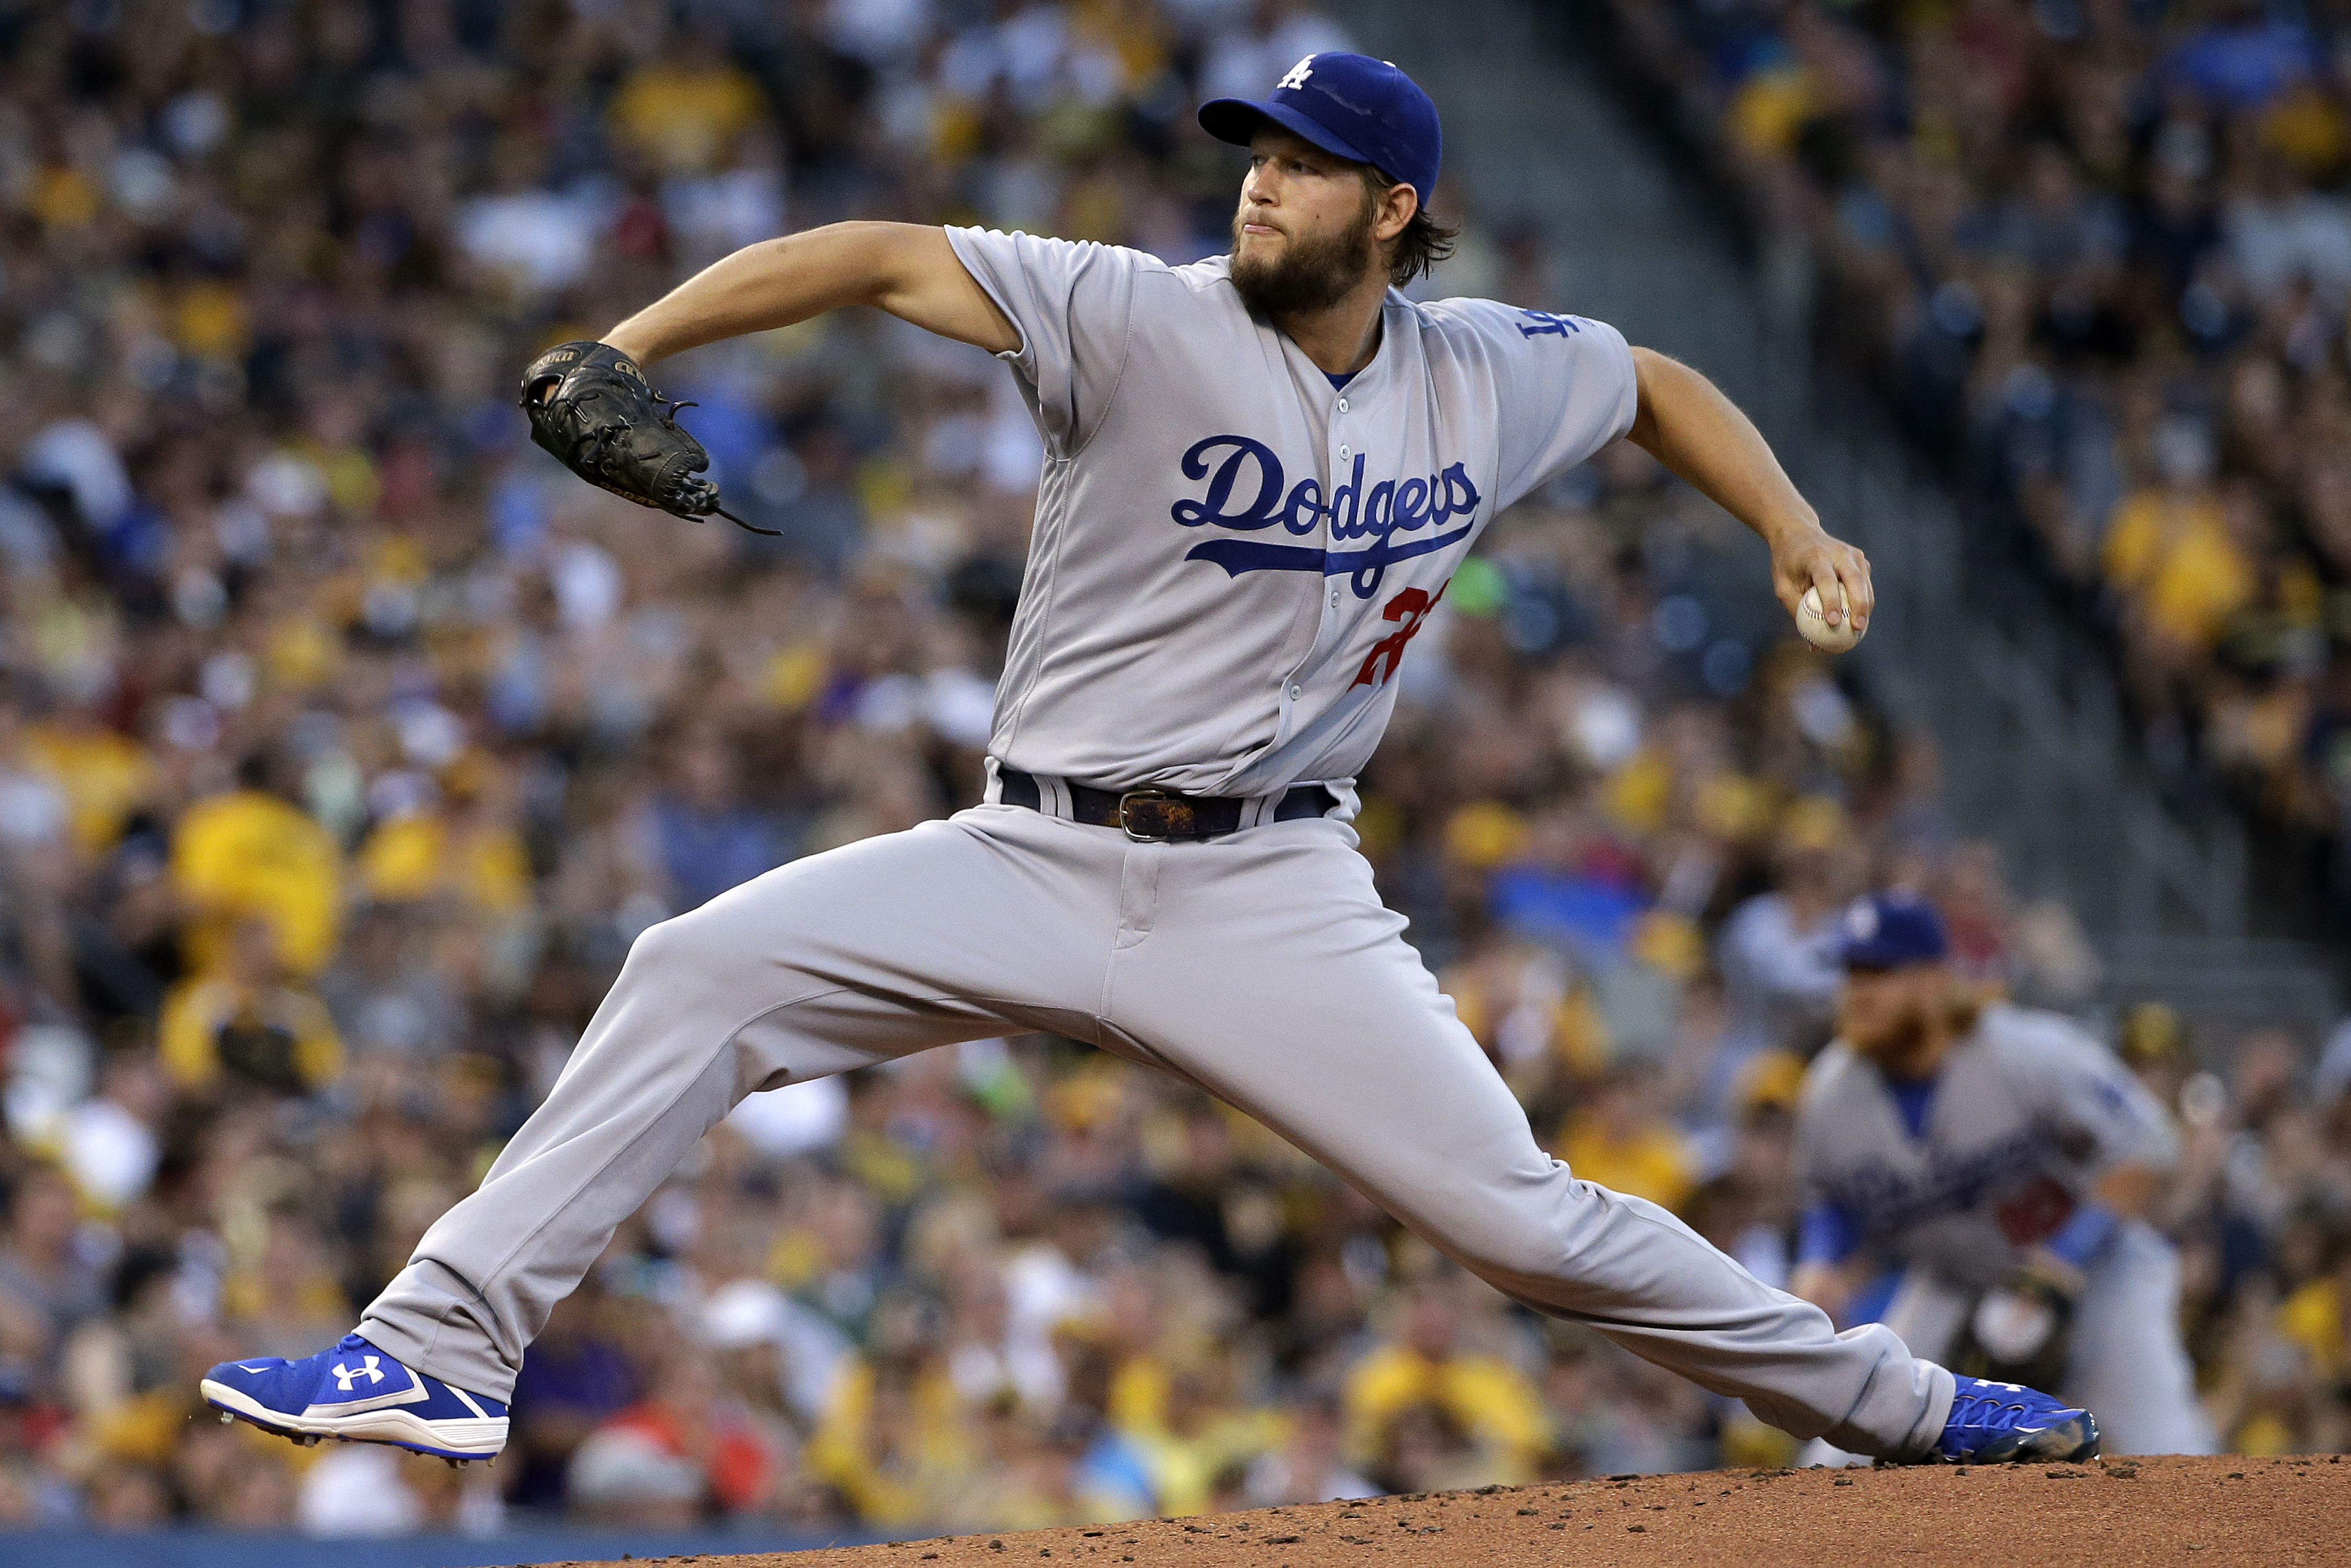 Clayton Kershaw wins 2014 NL MVP, Cy Young, many other honors - True Blue LA